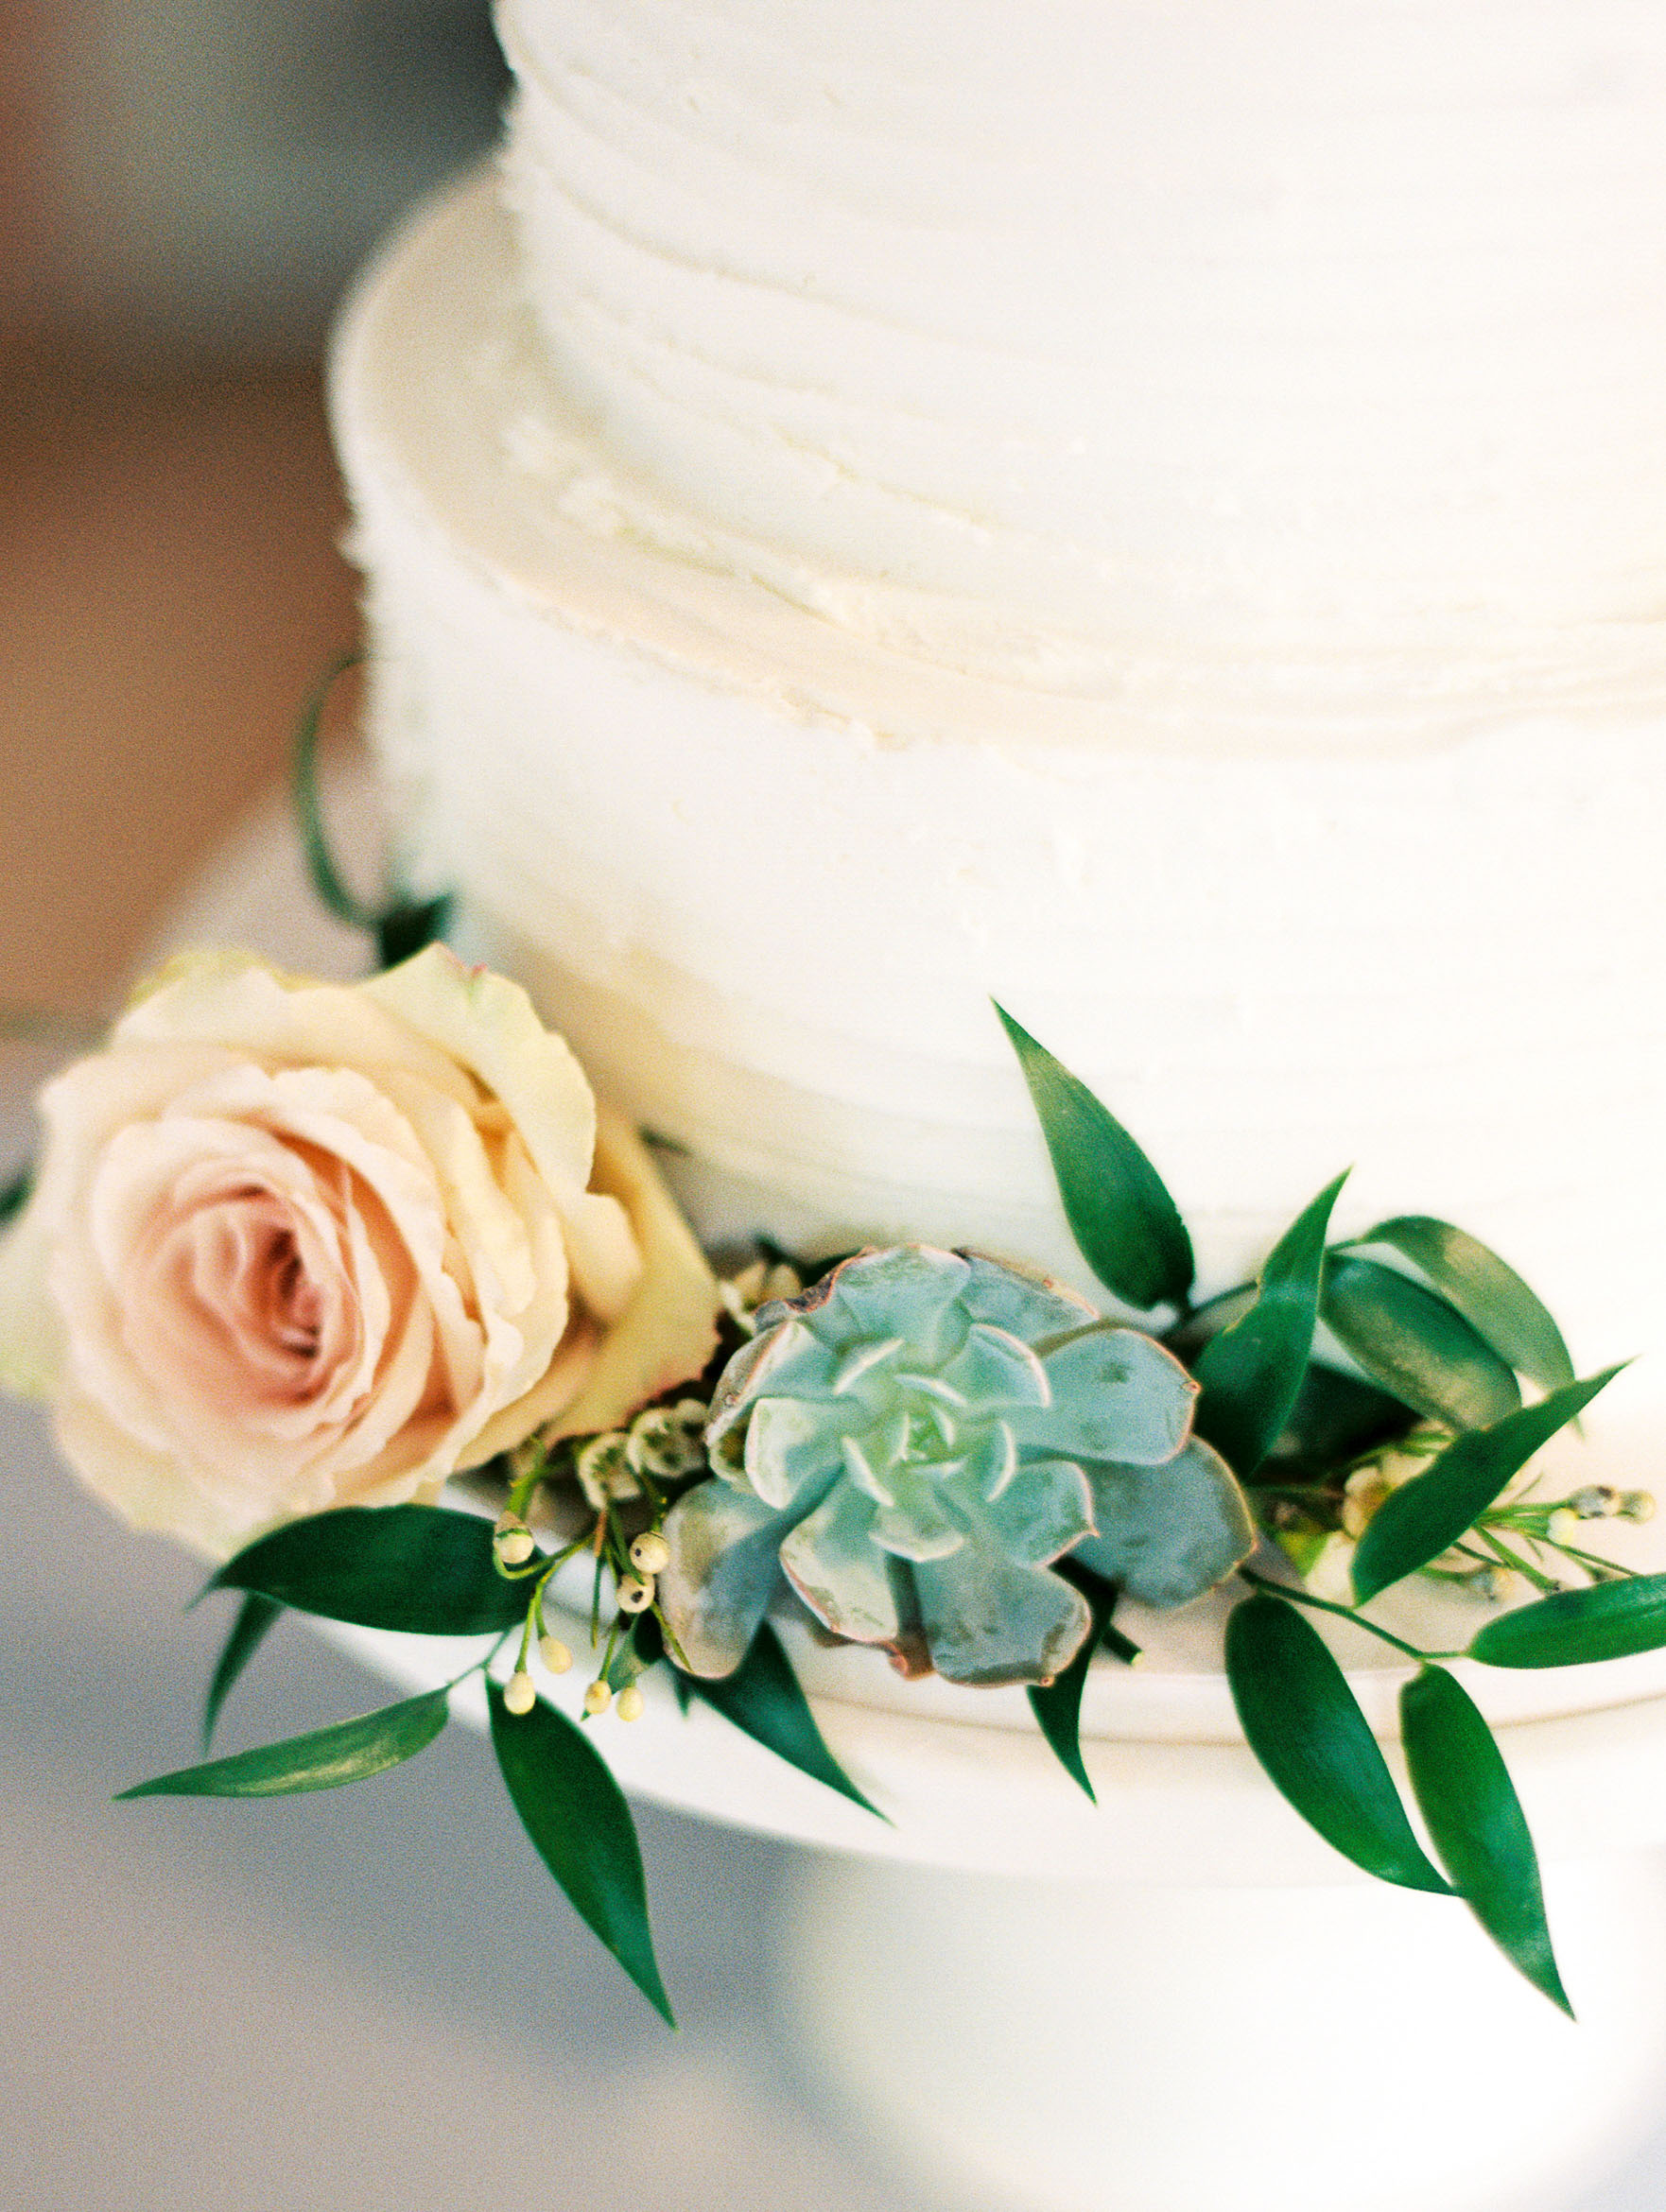 Wedding Cake with Succulent Details